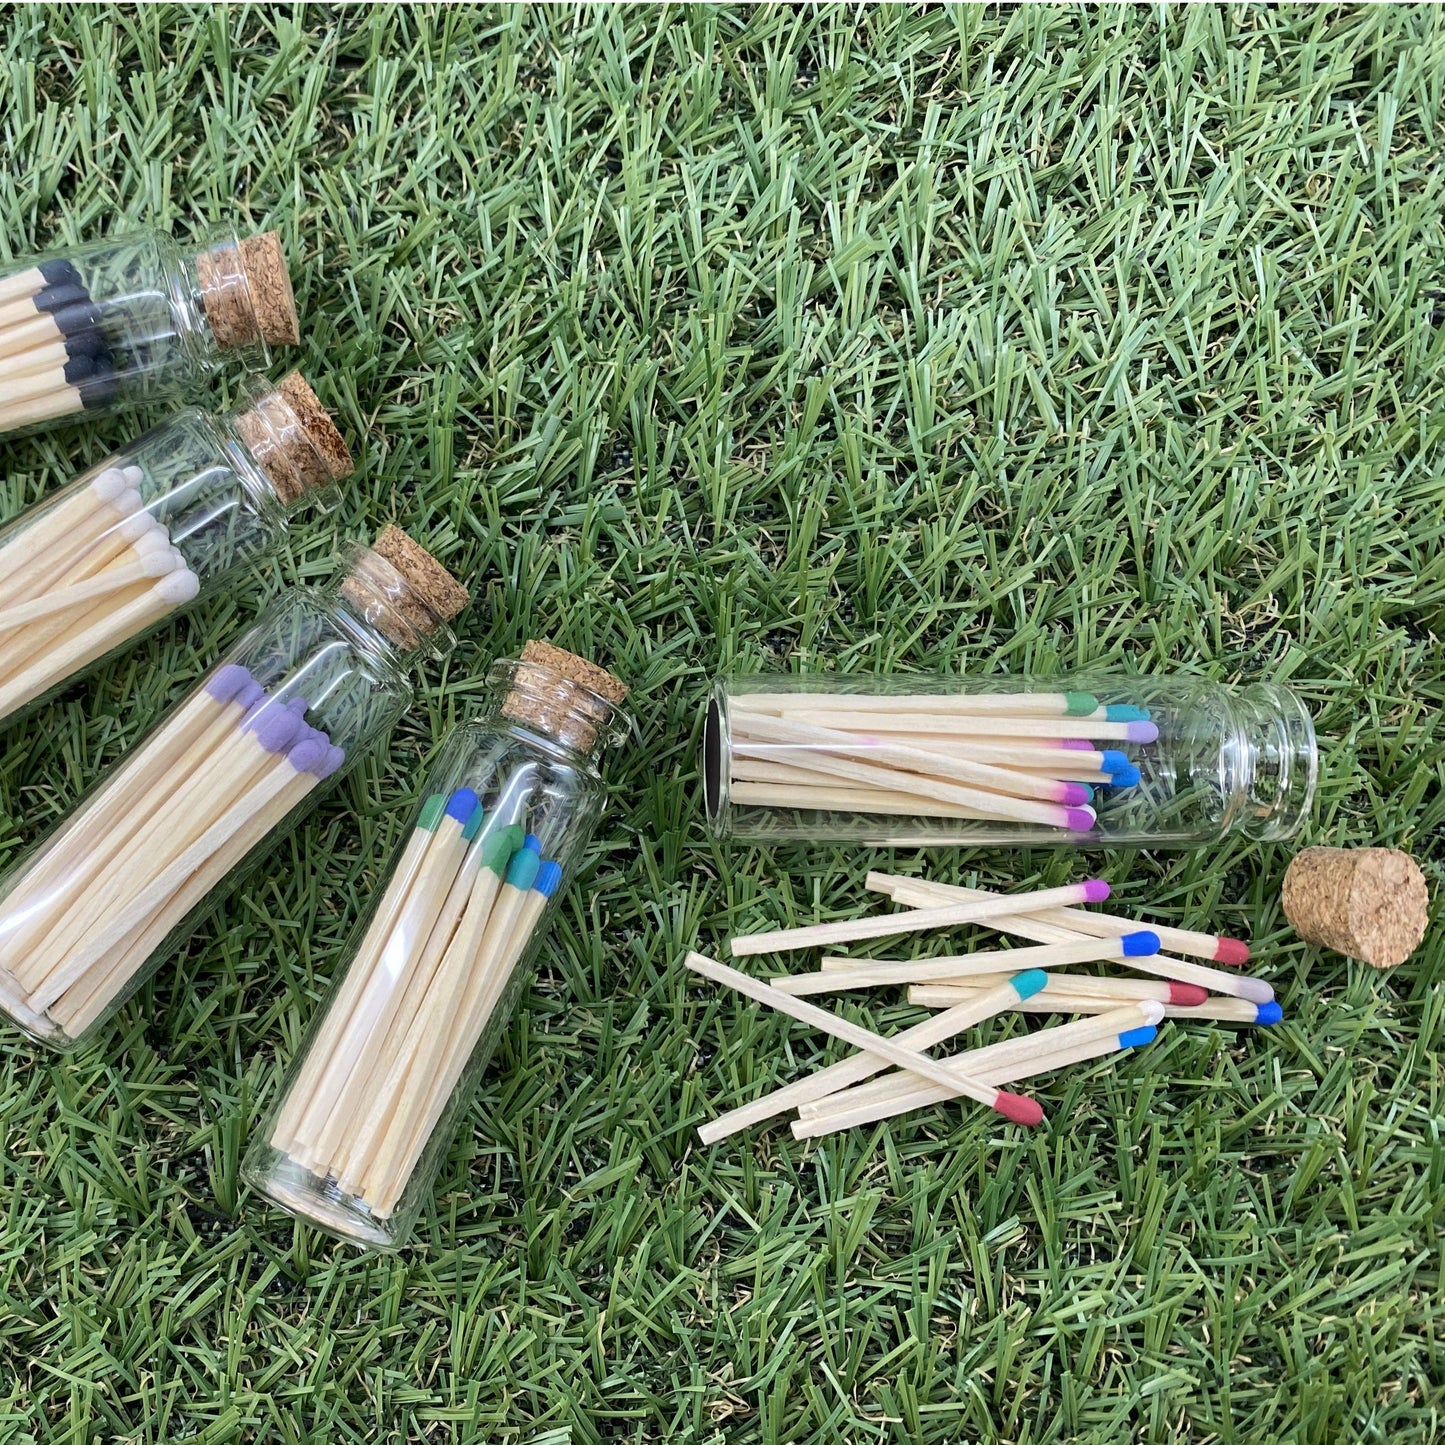 Matches, Various Coloured Tips